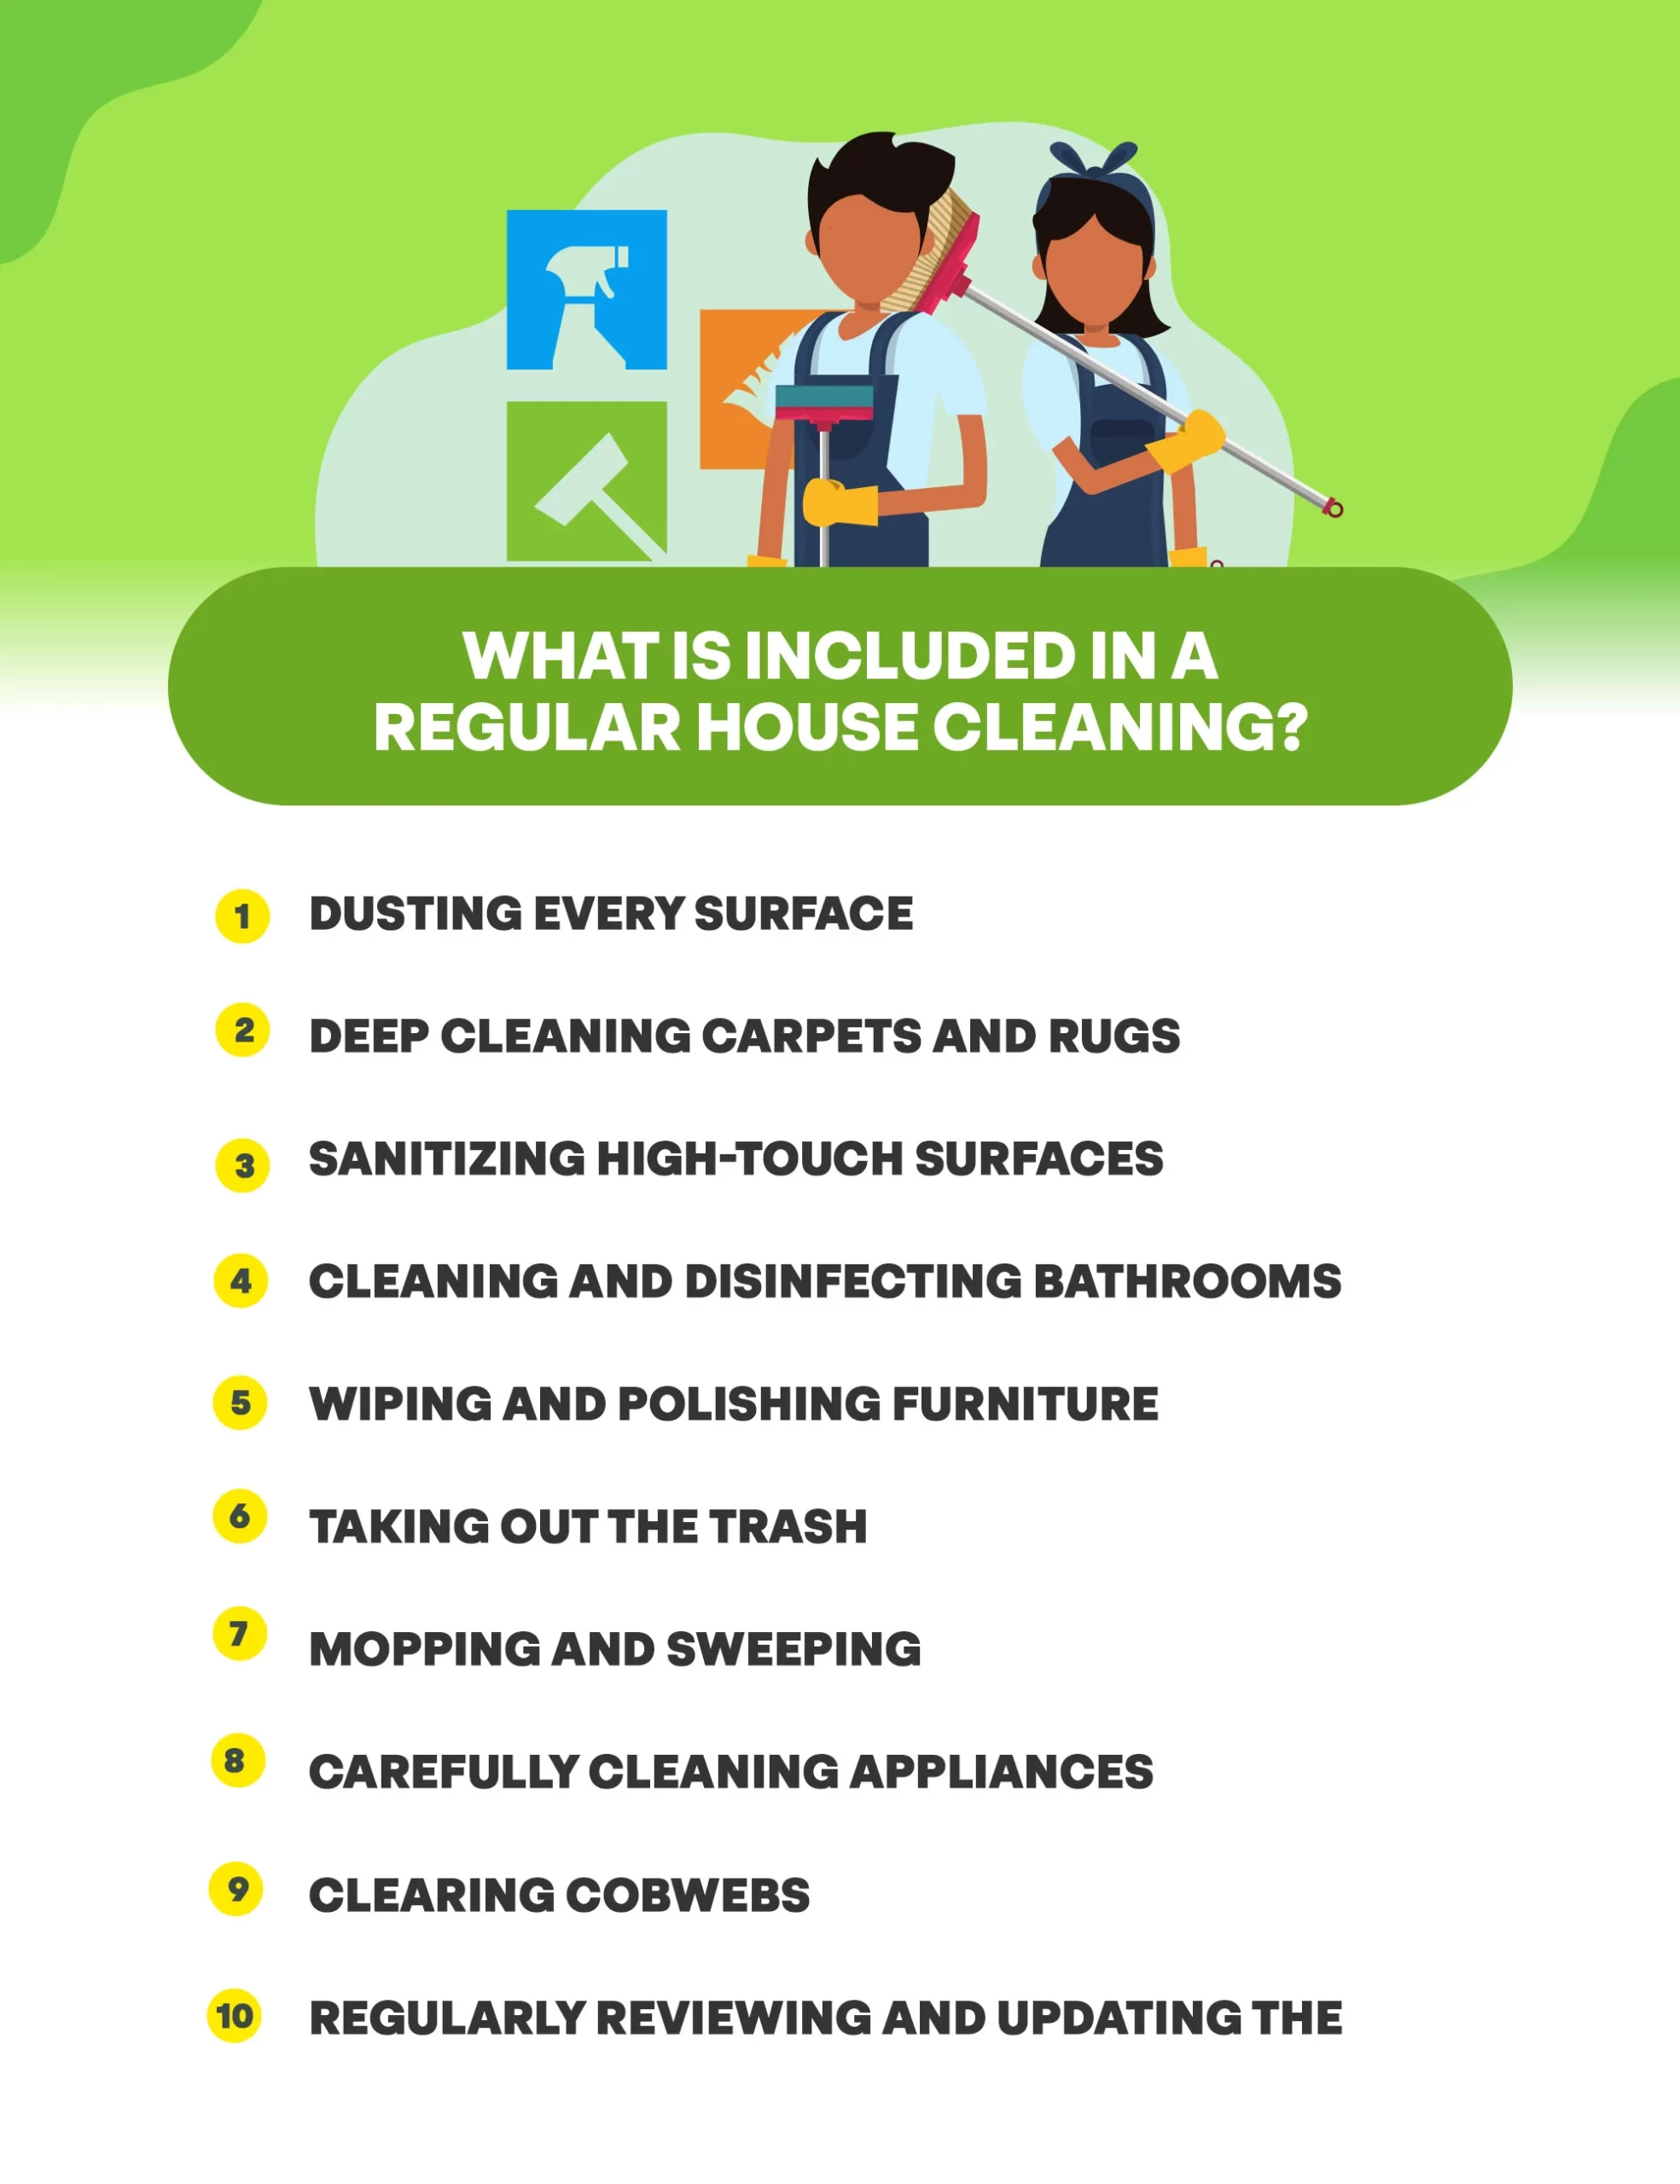 What is included in a regular house cleaning?